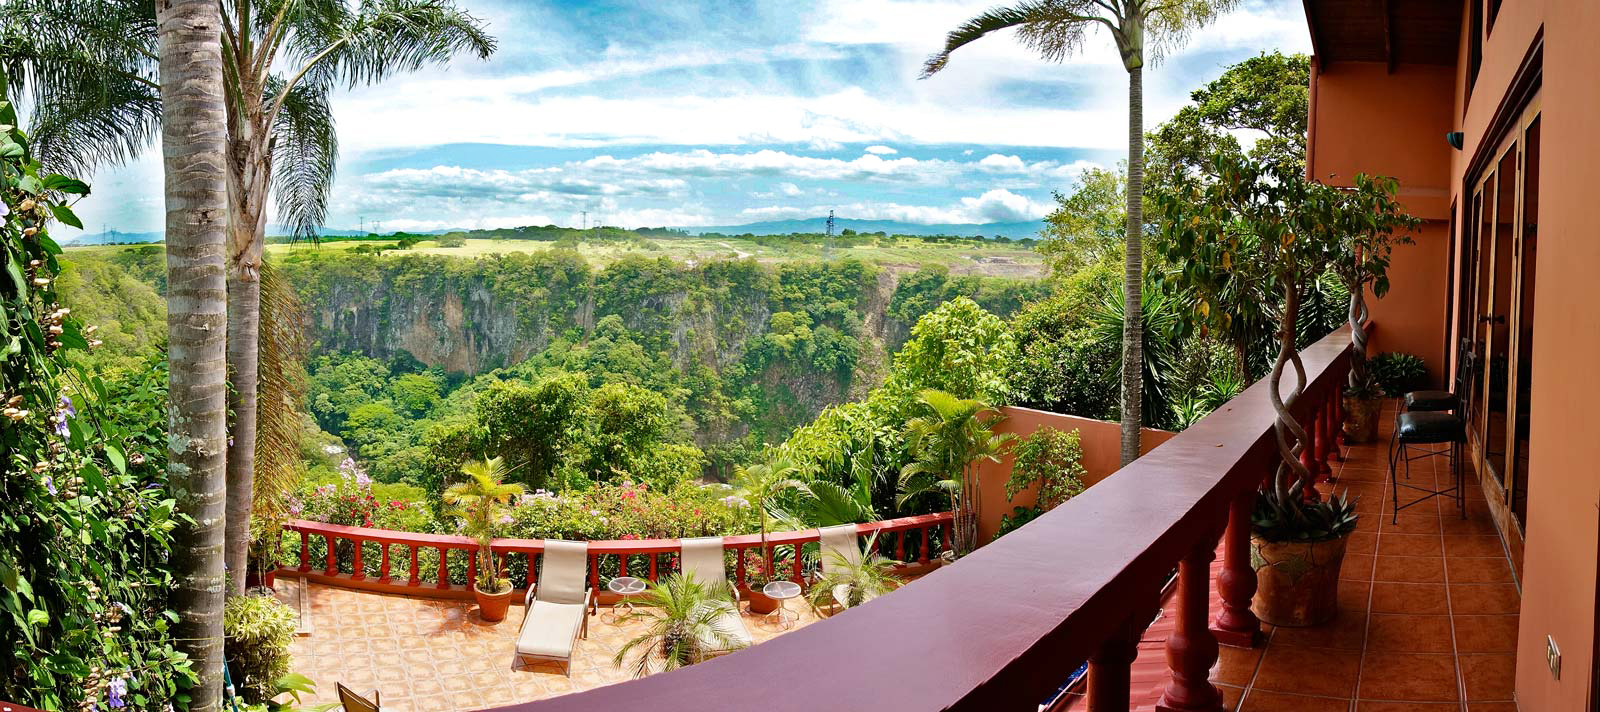 Great Investment Opportunity! Magical Bed and Breakfast in One of Costa Rica’s Most Desirable Areas